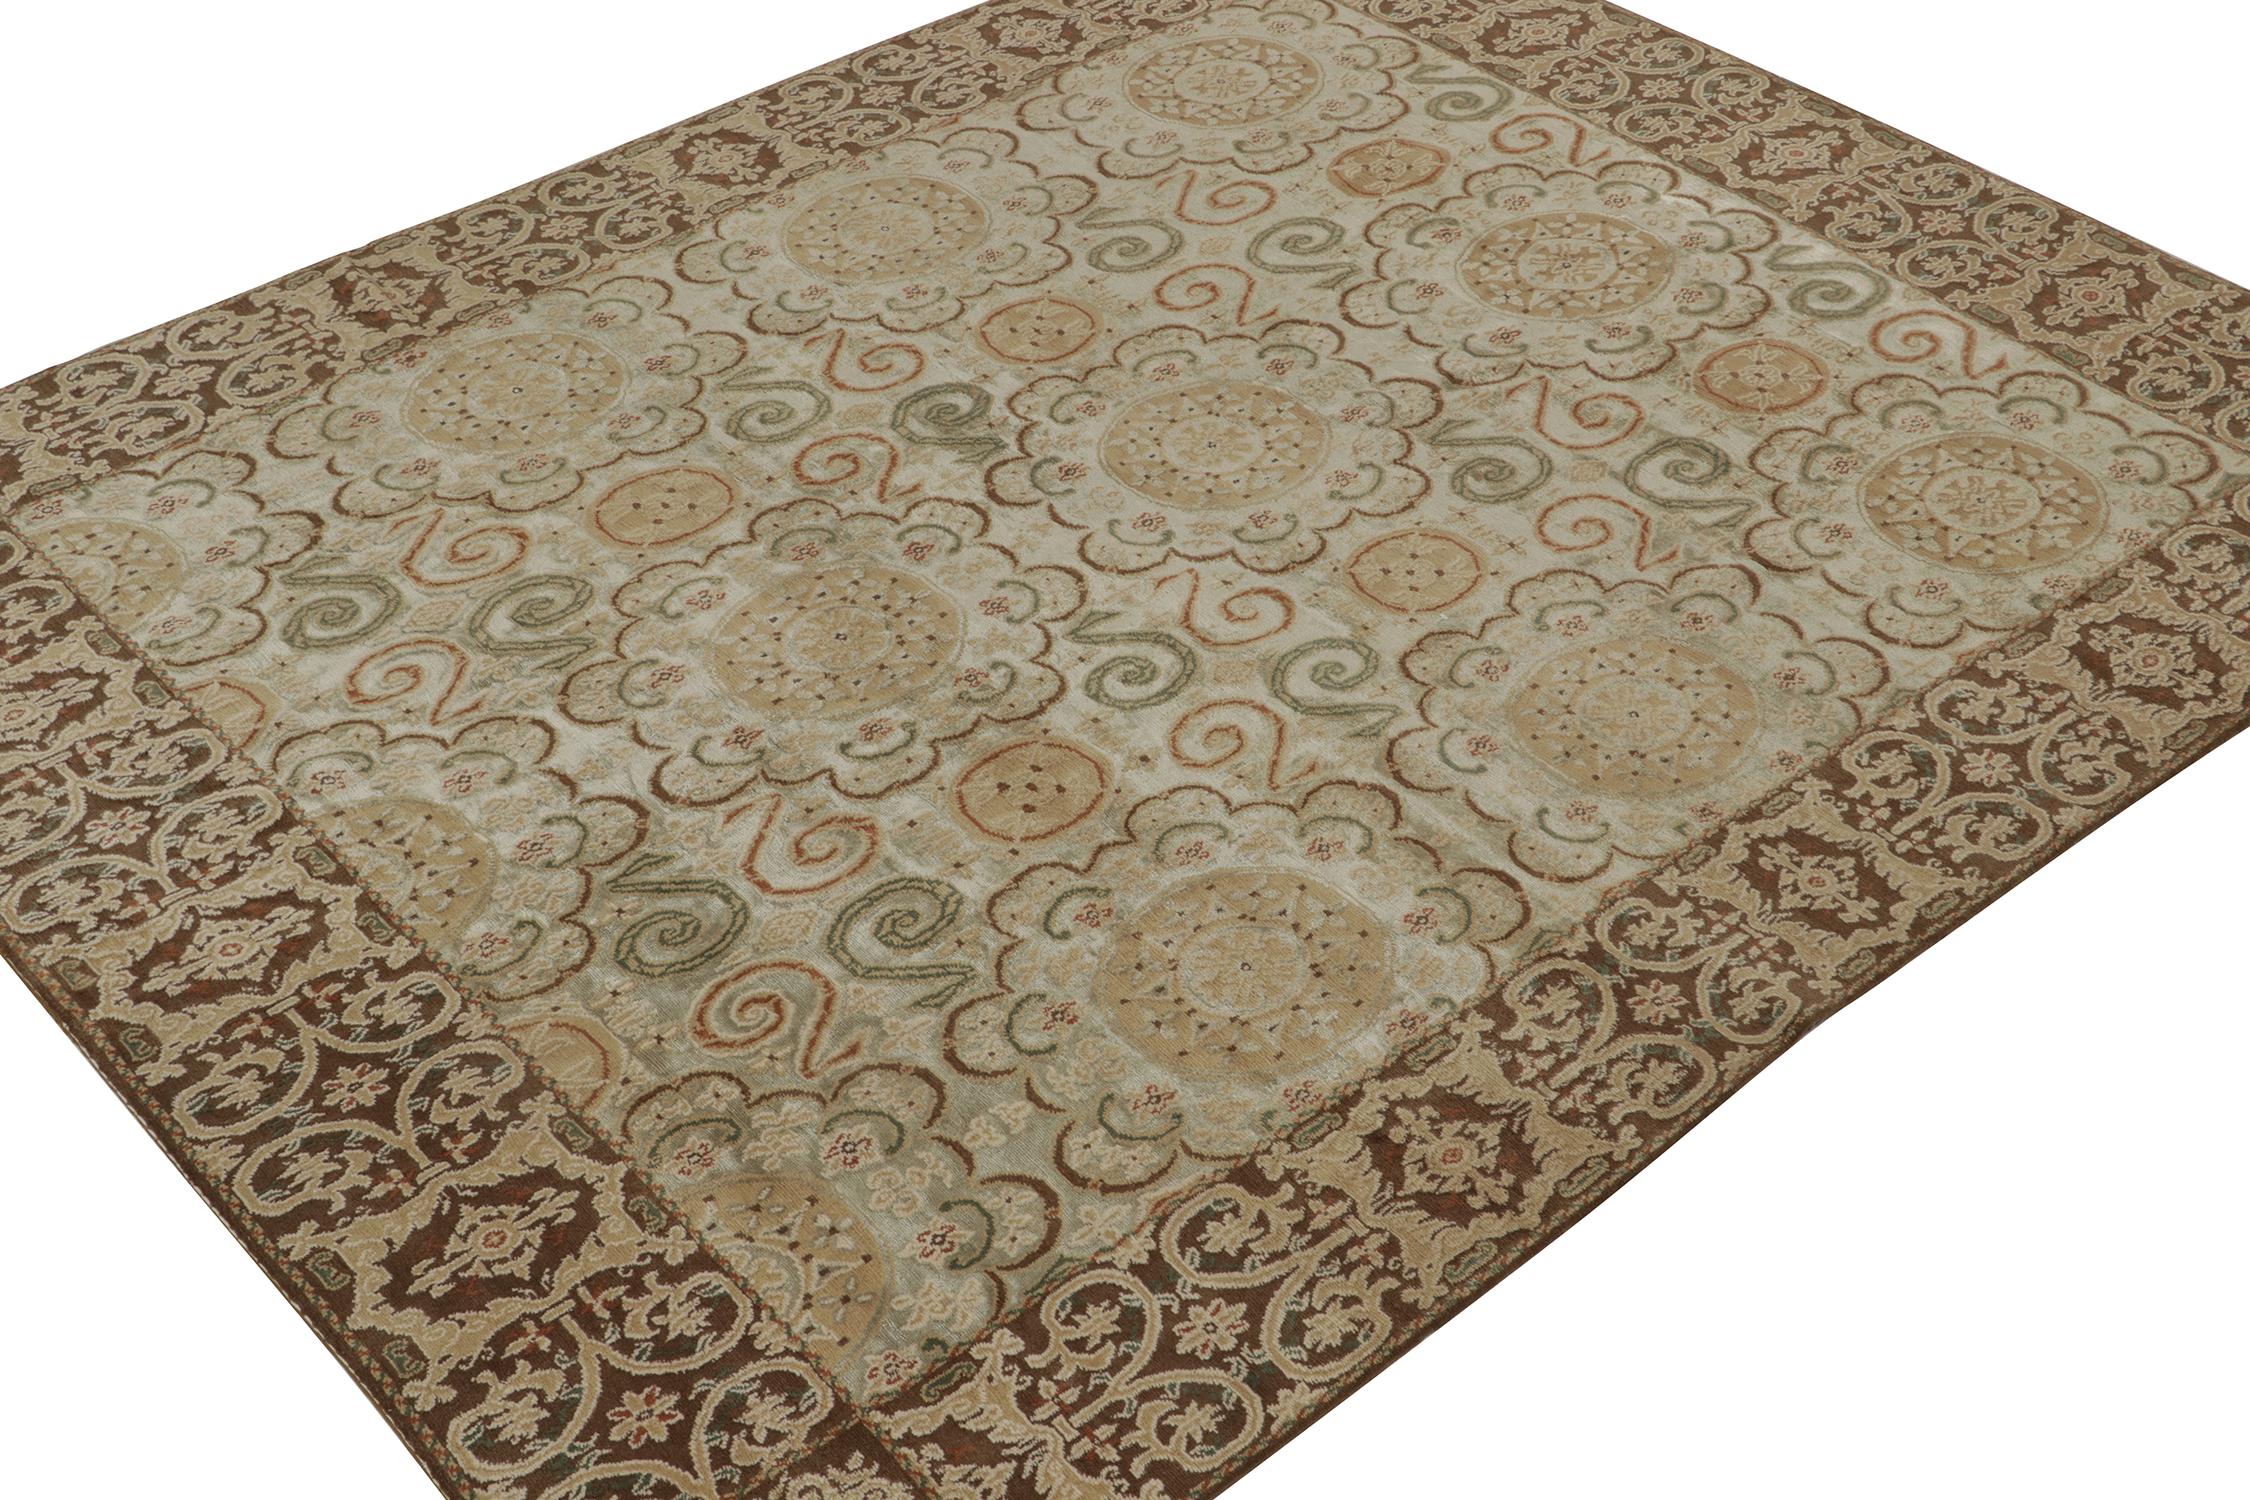 An 8x10 rug inspired from antique Spanish Art Nouveau rug styles, from Rug & Kilim’s European Collection. Hand-knotted in wool and silk, playing an exceptional gold with beige, brown, and green patterns of classic grace.

Further On the